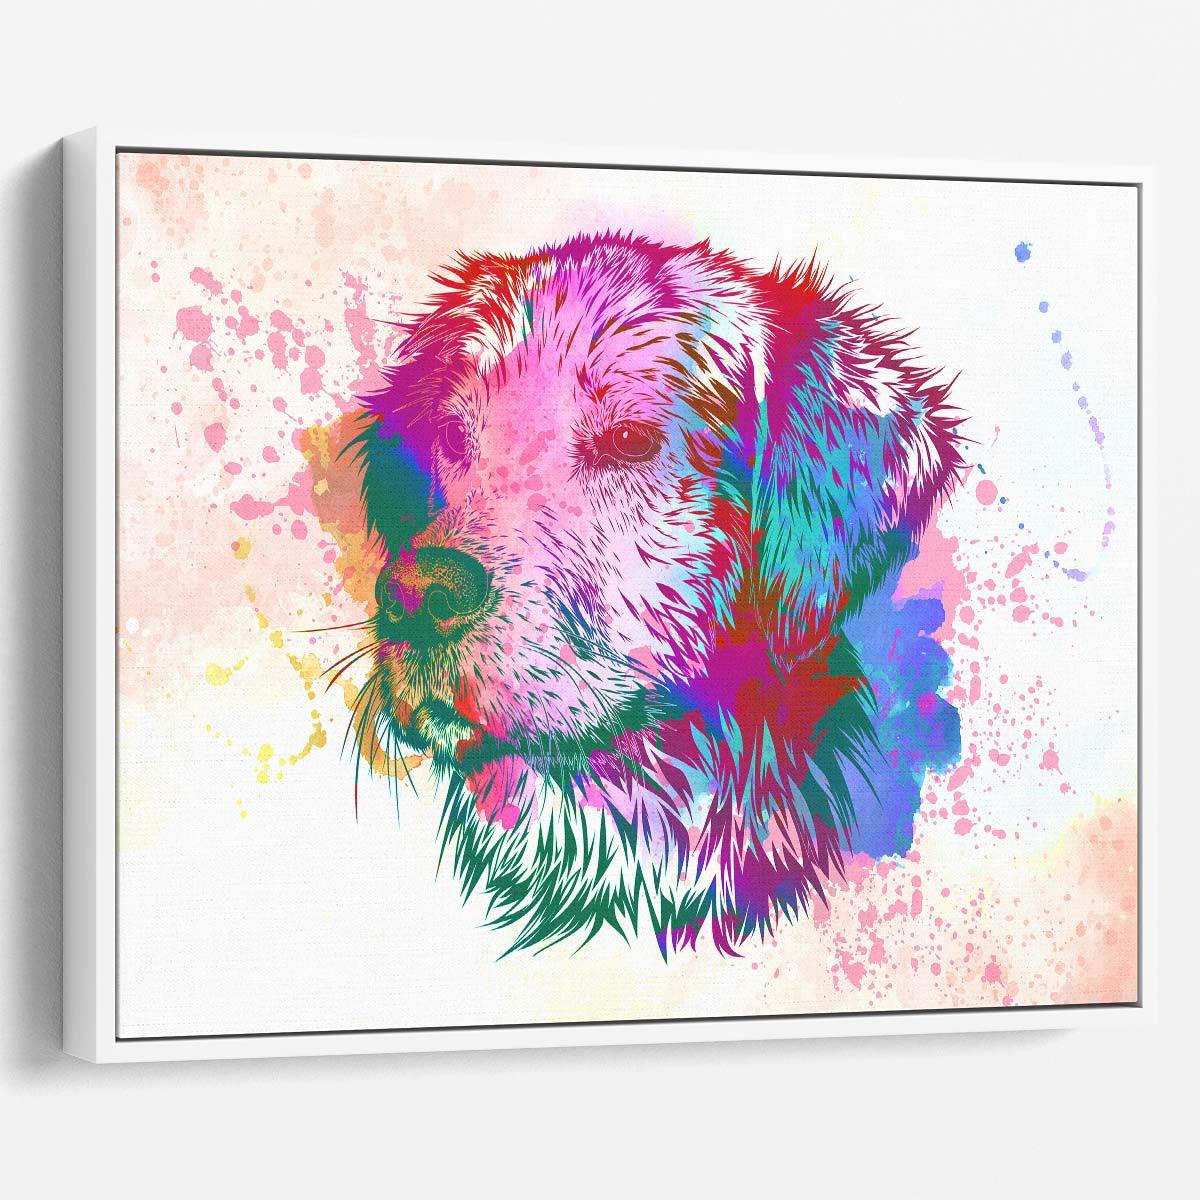 Dog Watercolor Painting Wall Art by Luxuriance Designs. Made in USA.